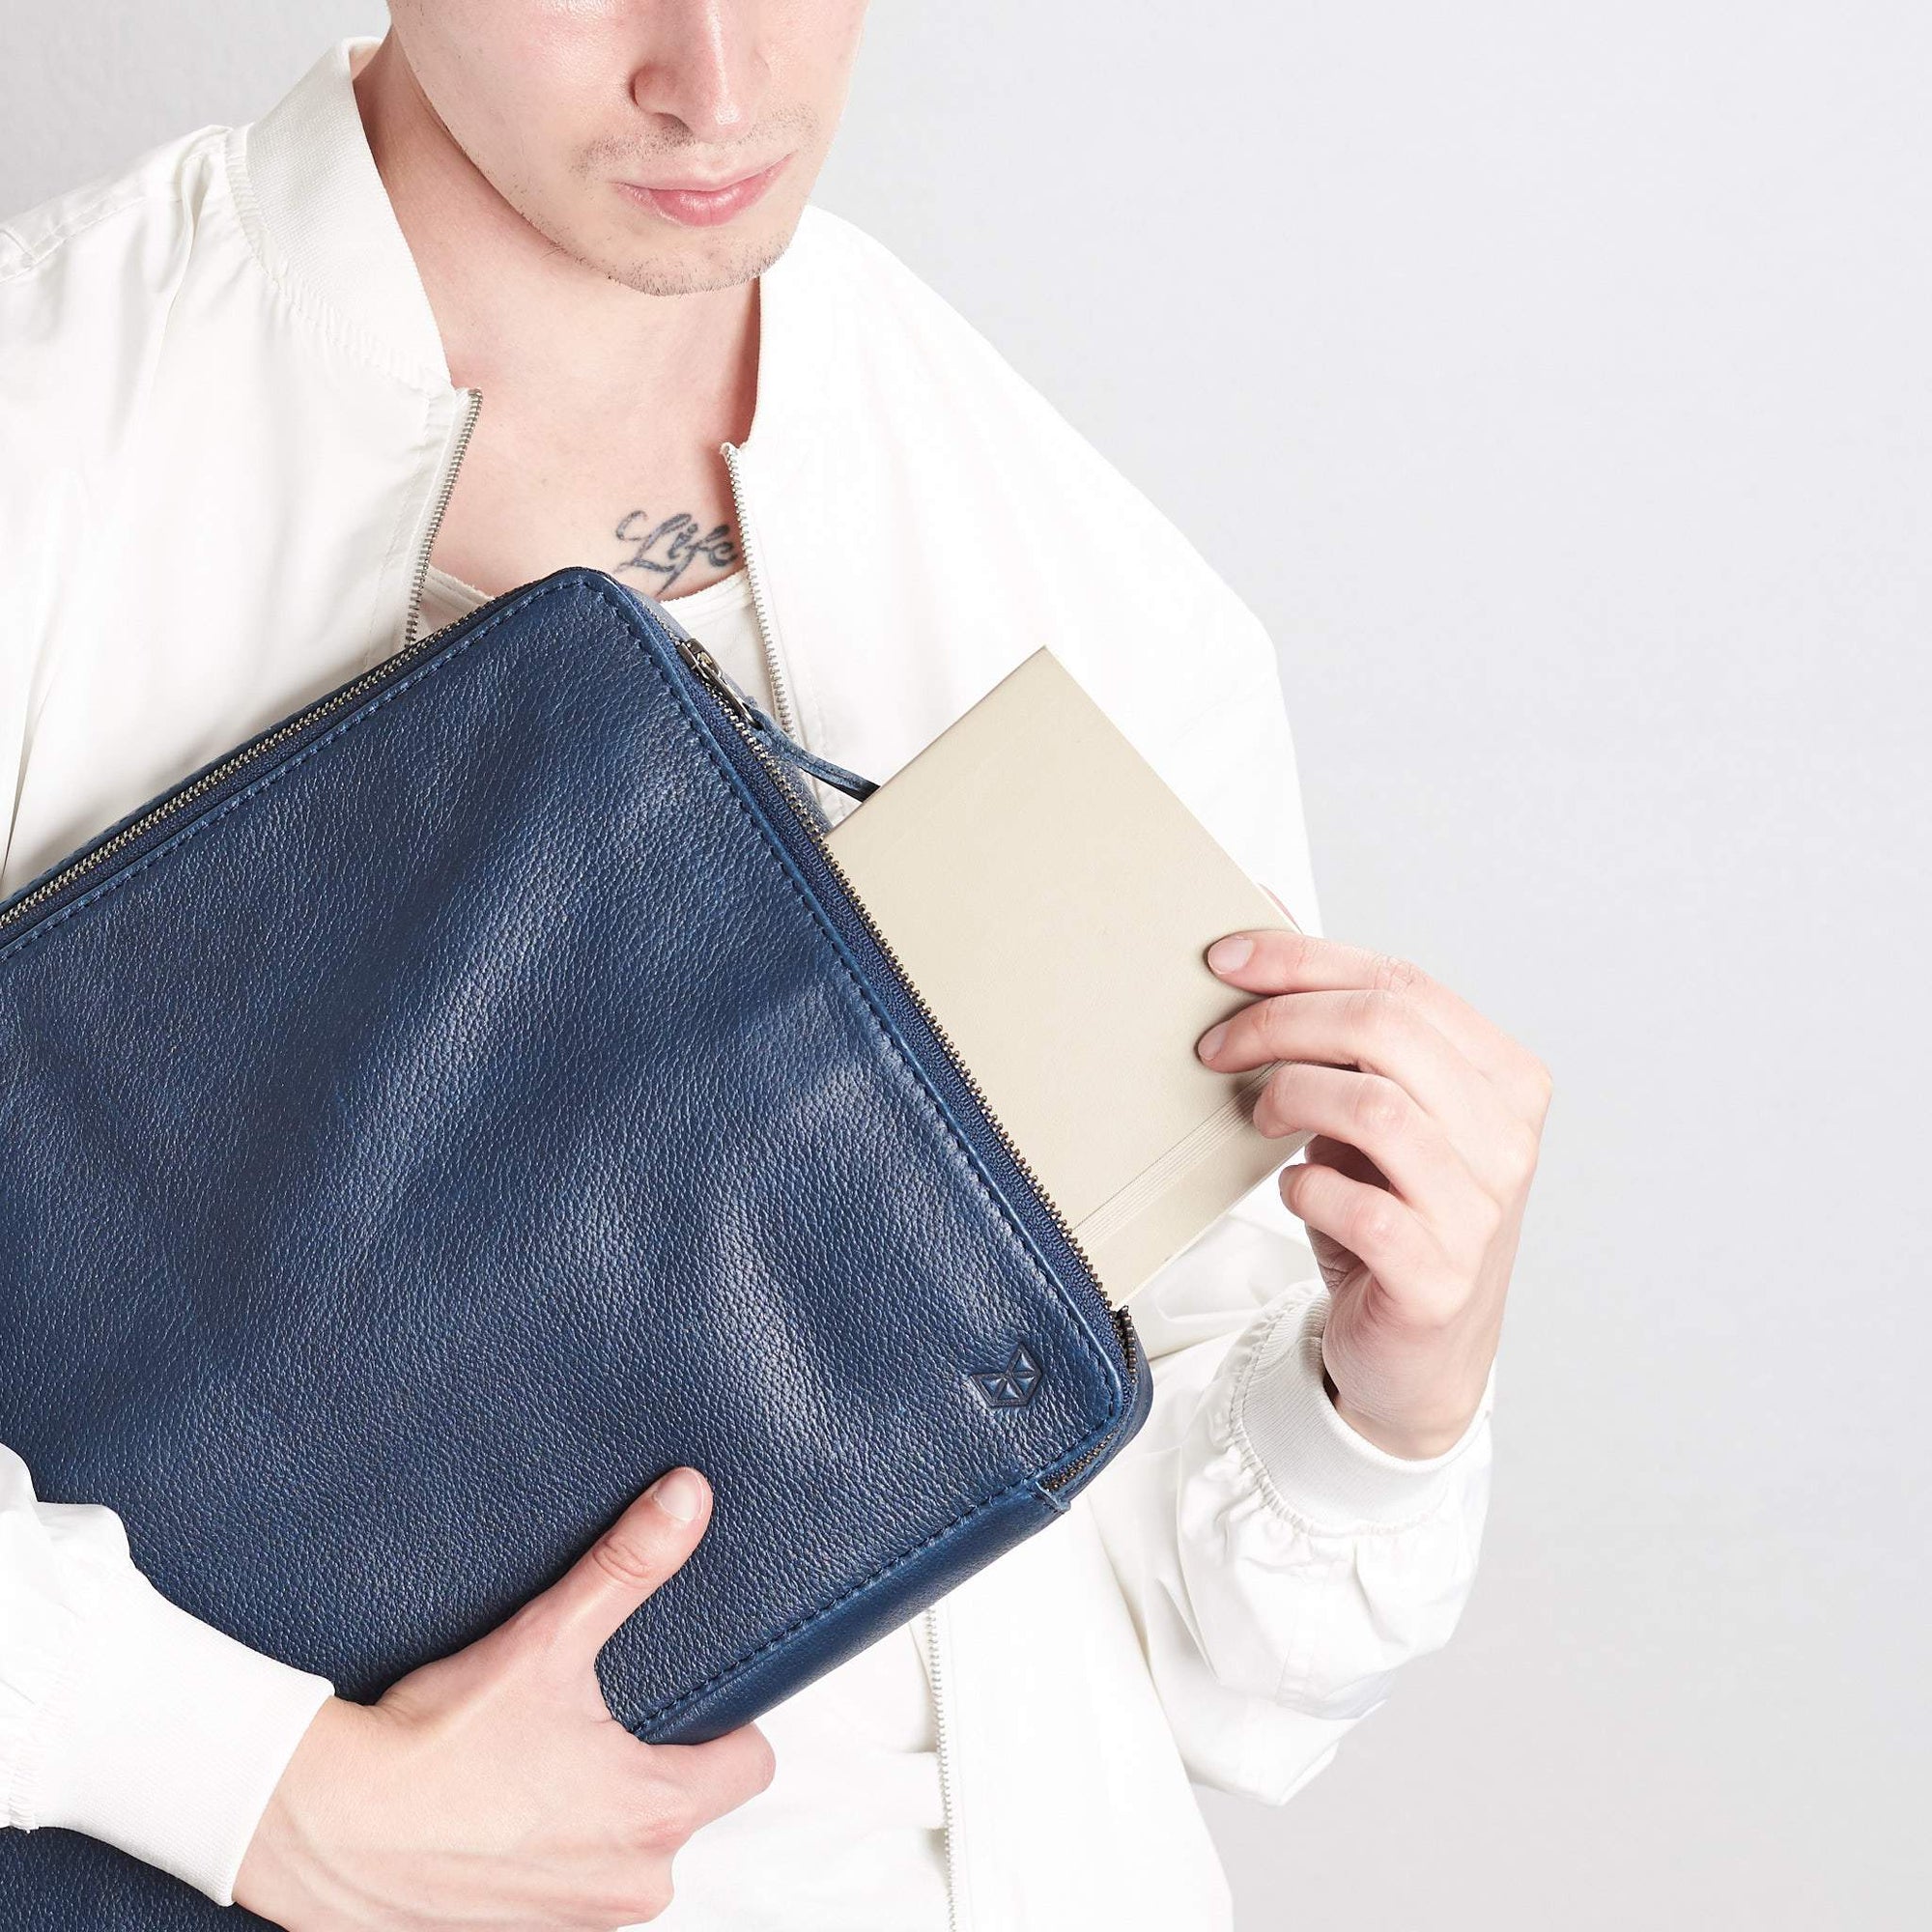 Style tech bags for men. Navy blue gadget bag for travel by Capra Leather